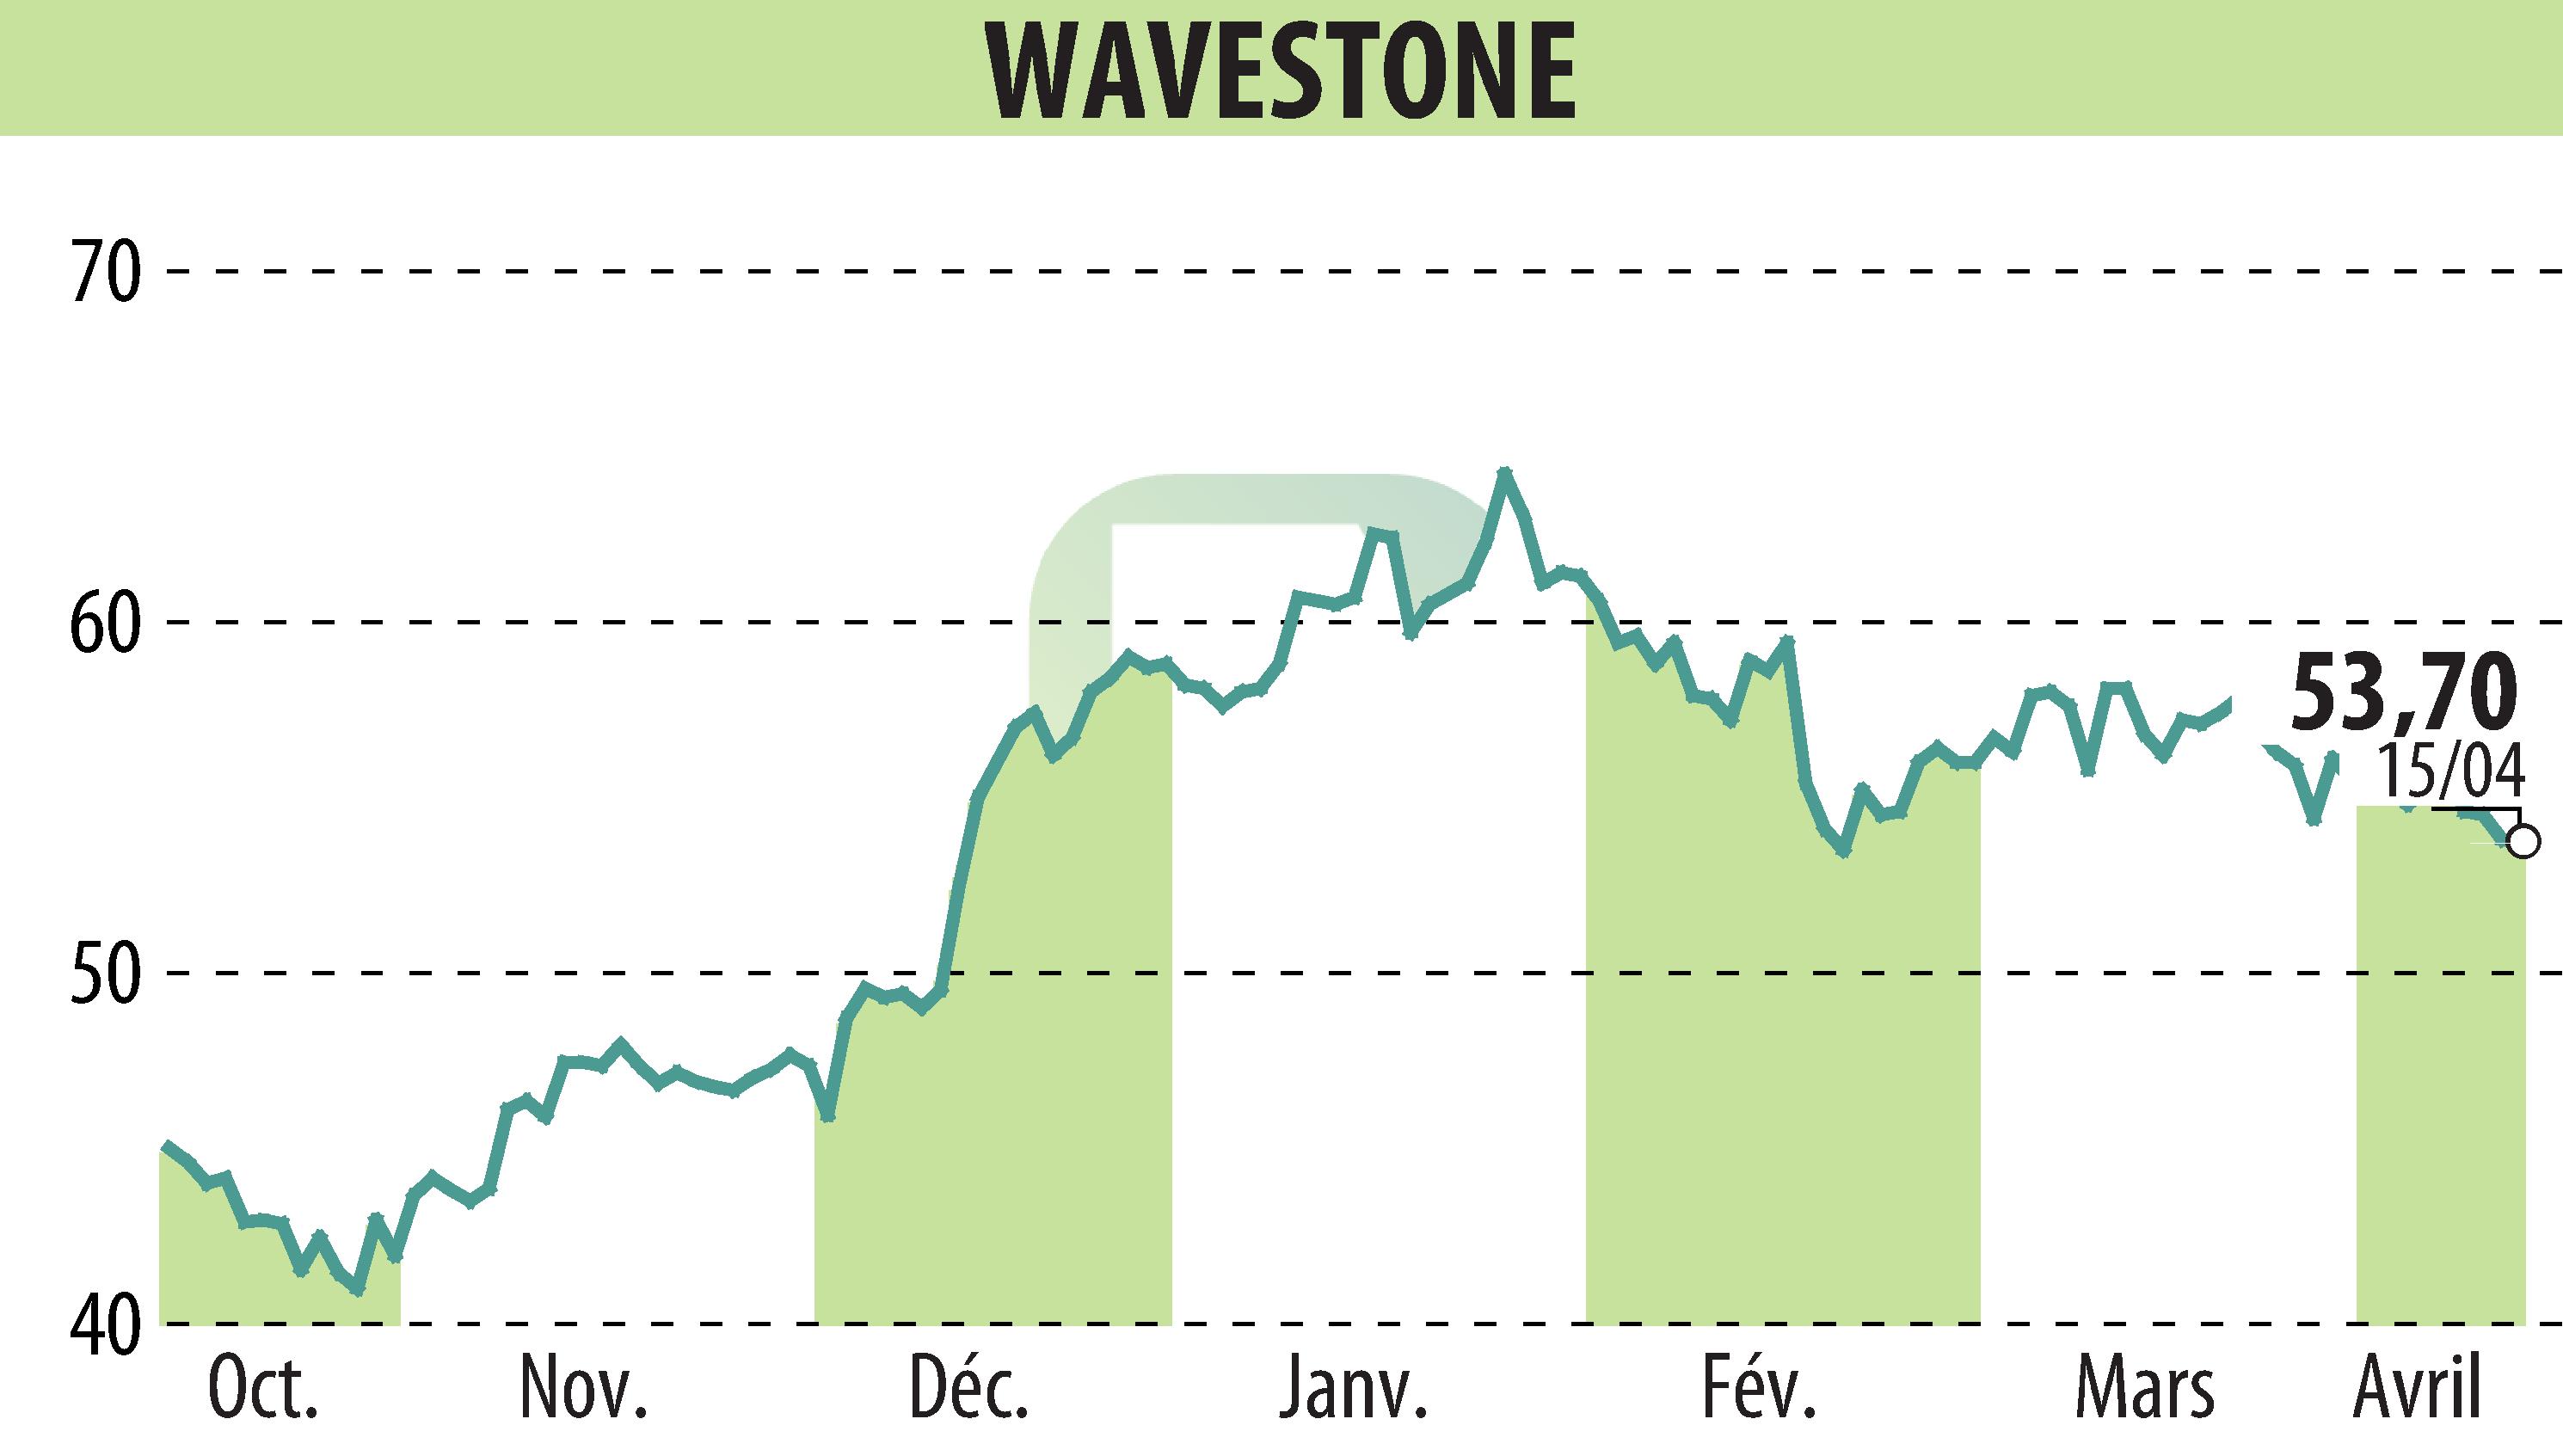 Stock price chart of WAVESTONE (EPA:WAVE) showing fluctuations.